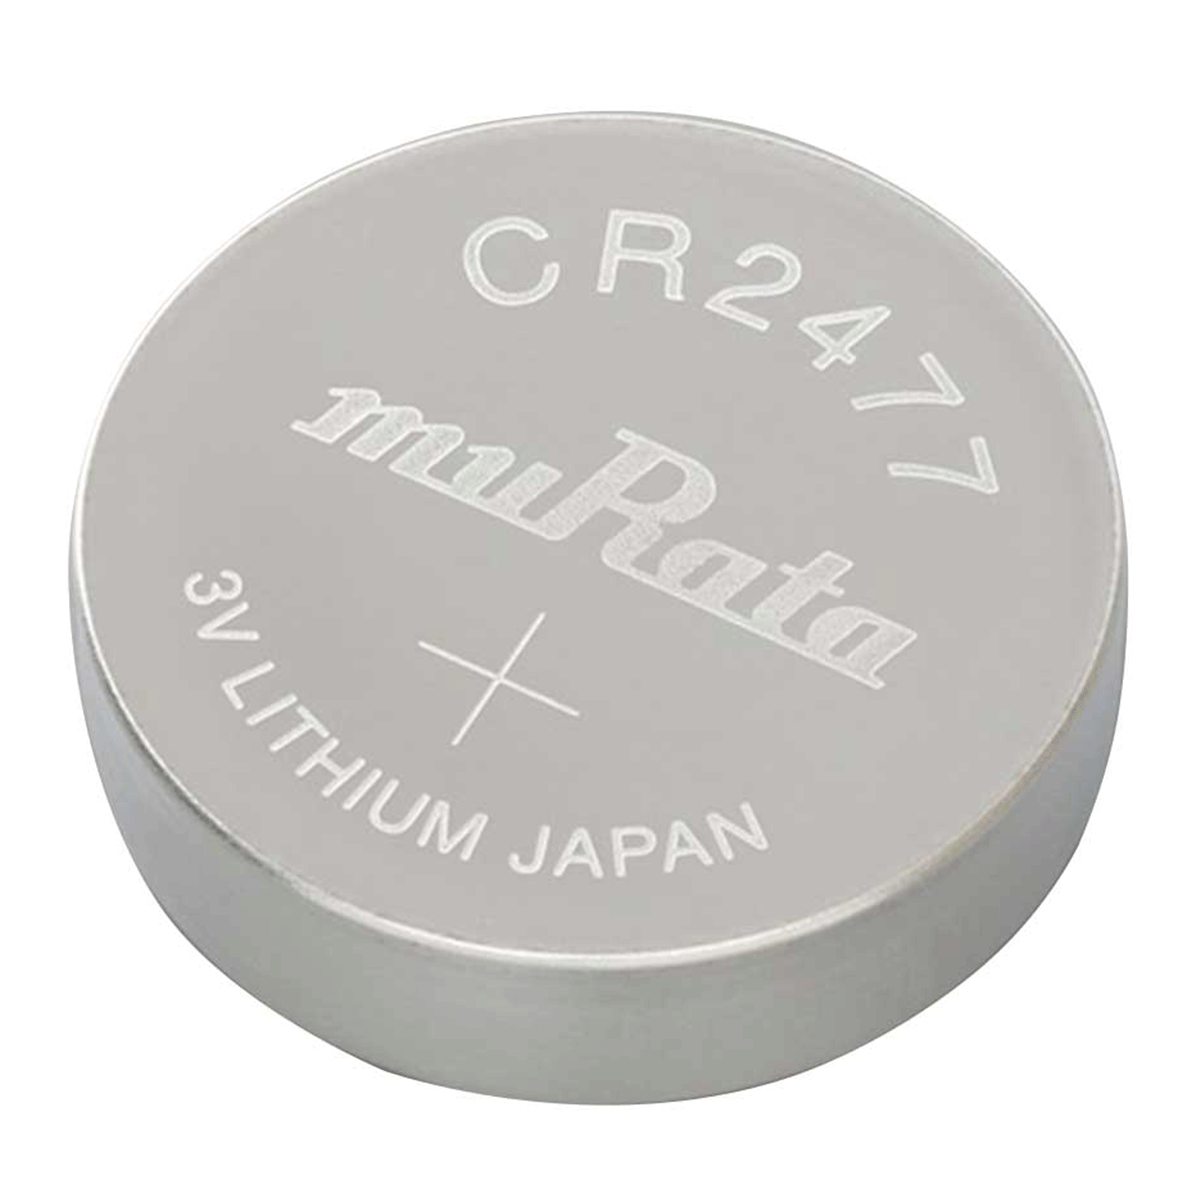 KaPonsec CR2477 CR2477h 3V Lithium Coin Cell Battery(Pack of 5)